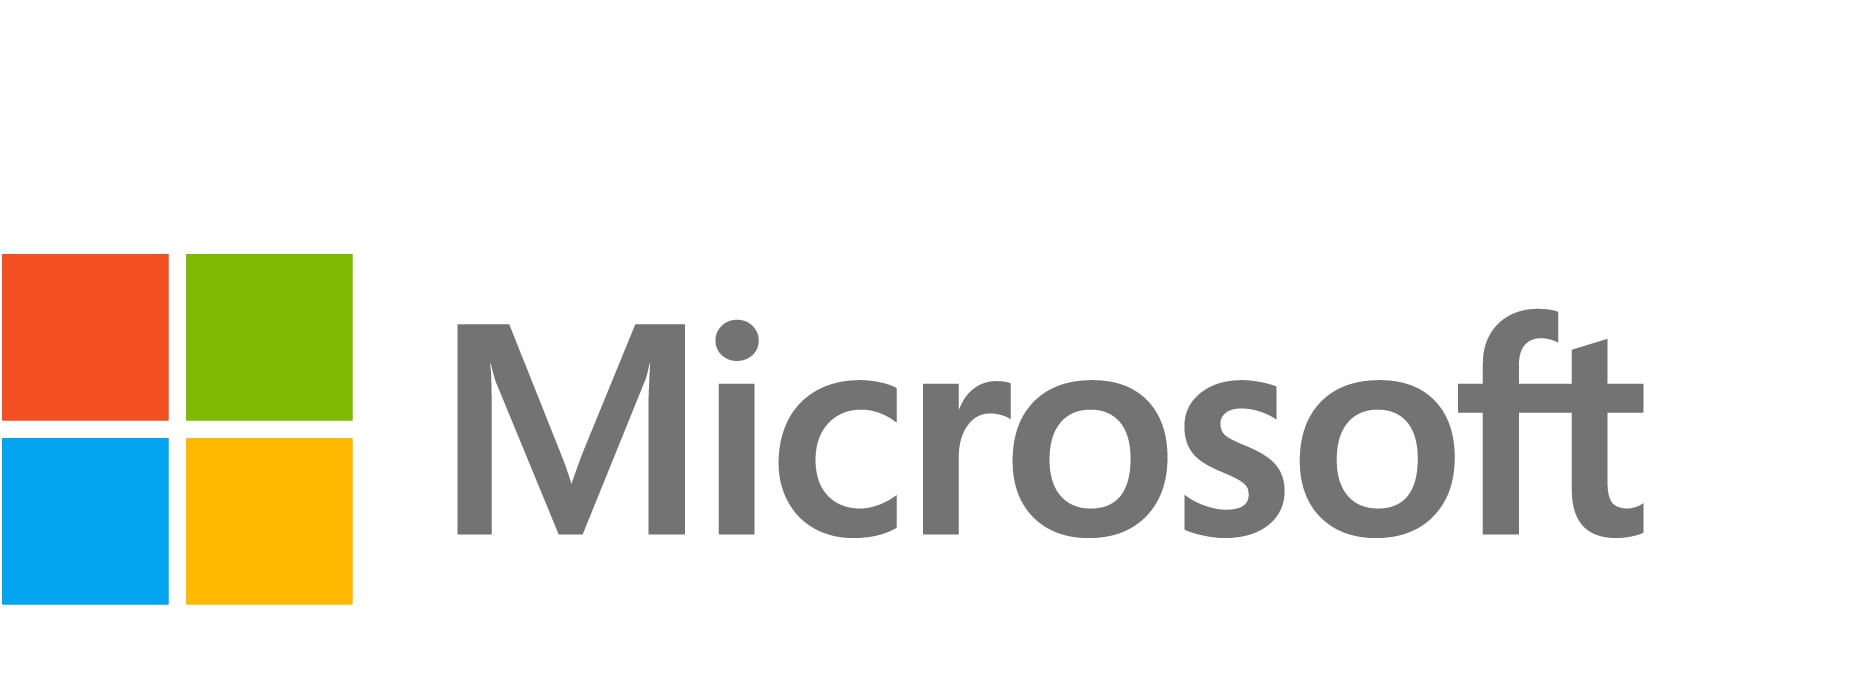 Microsoft Dynamics 365 Customer Service Intelligent Voicebot Minutes Add-on - subscription license (1 month) - 1 license